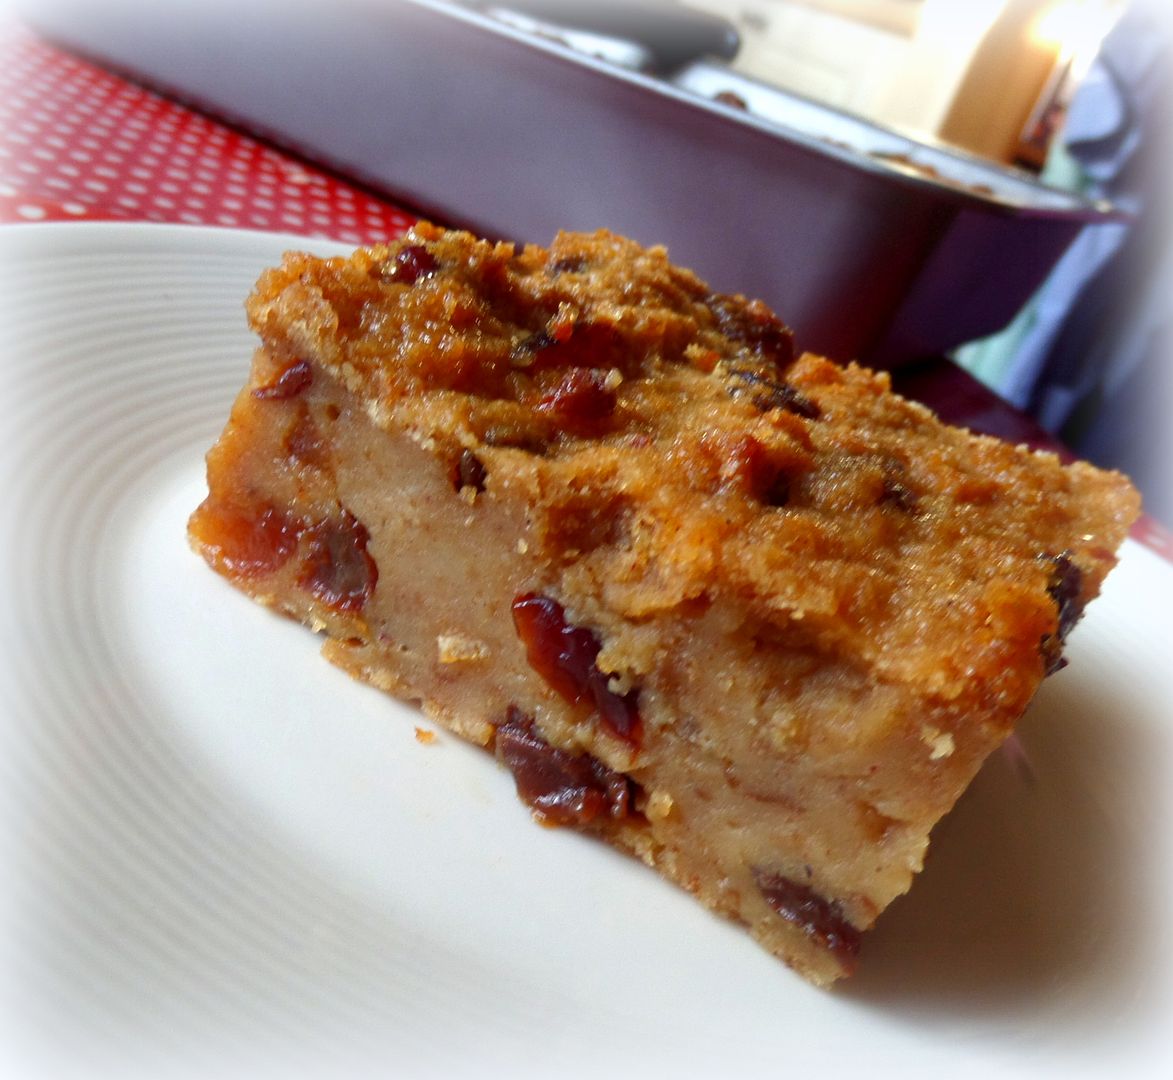 The English Kitchen: Old Time Bread Pudding Old Country Buffet Bread Pudding Recipe